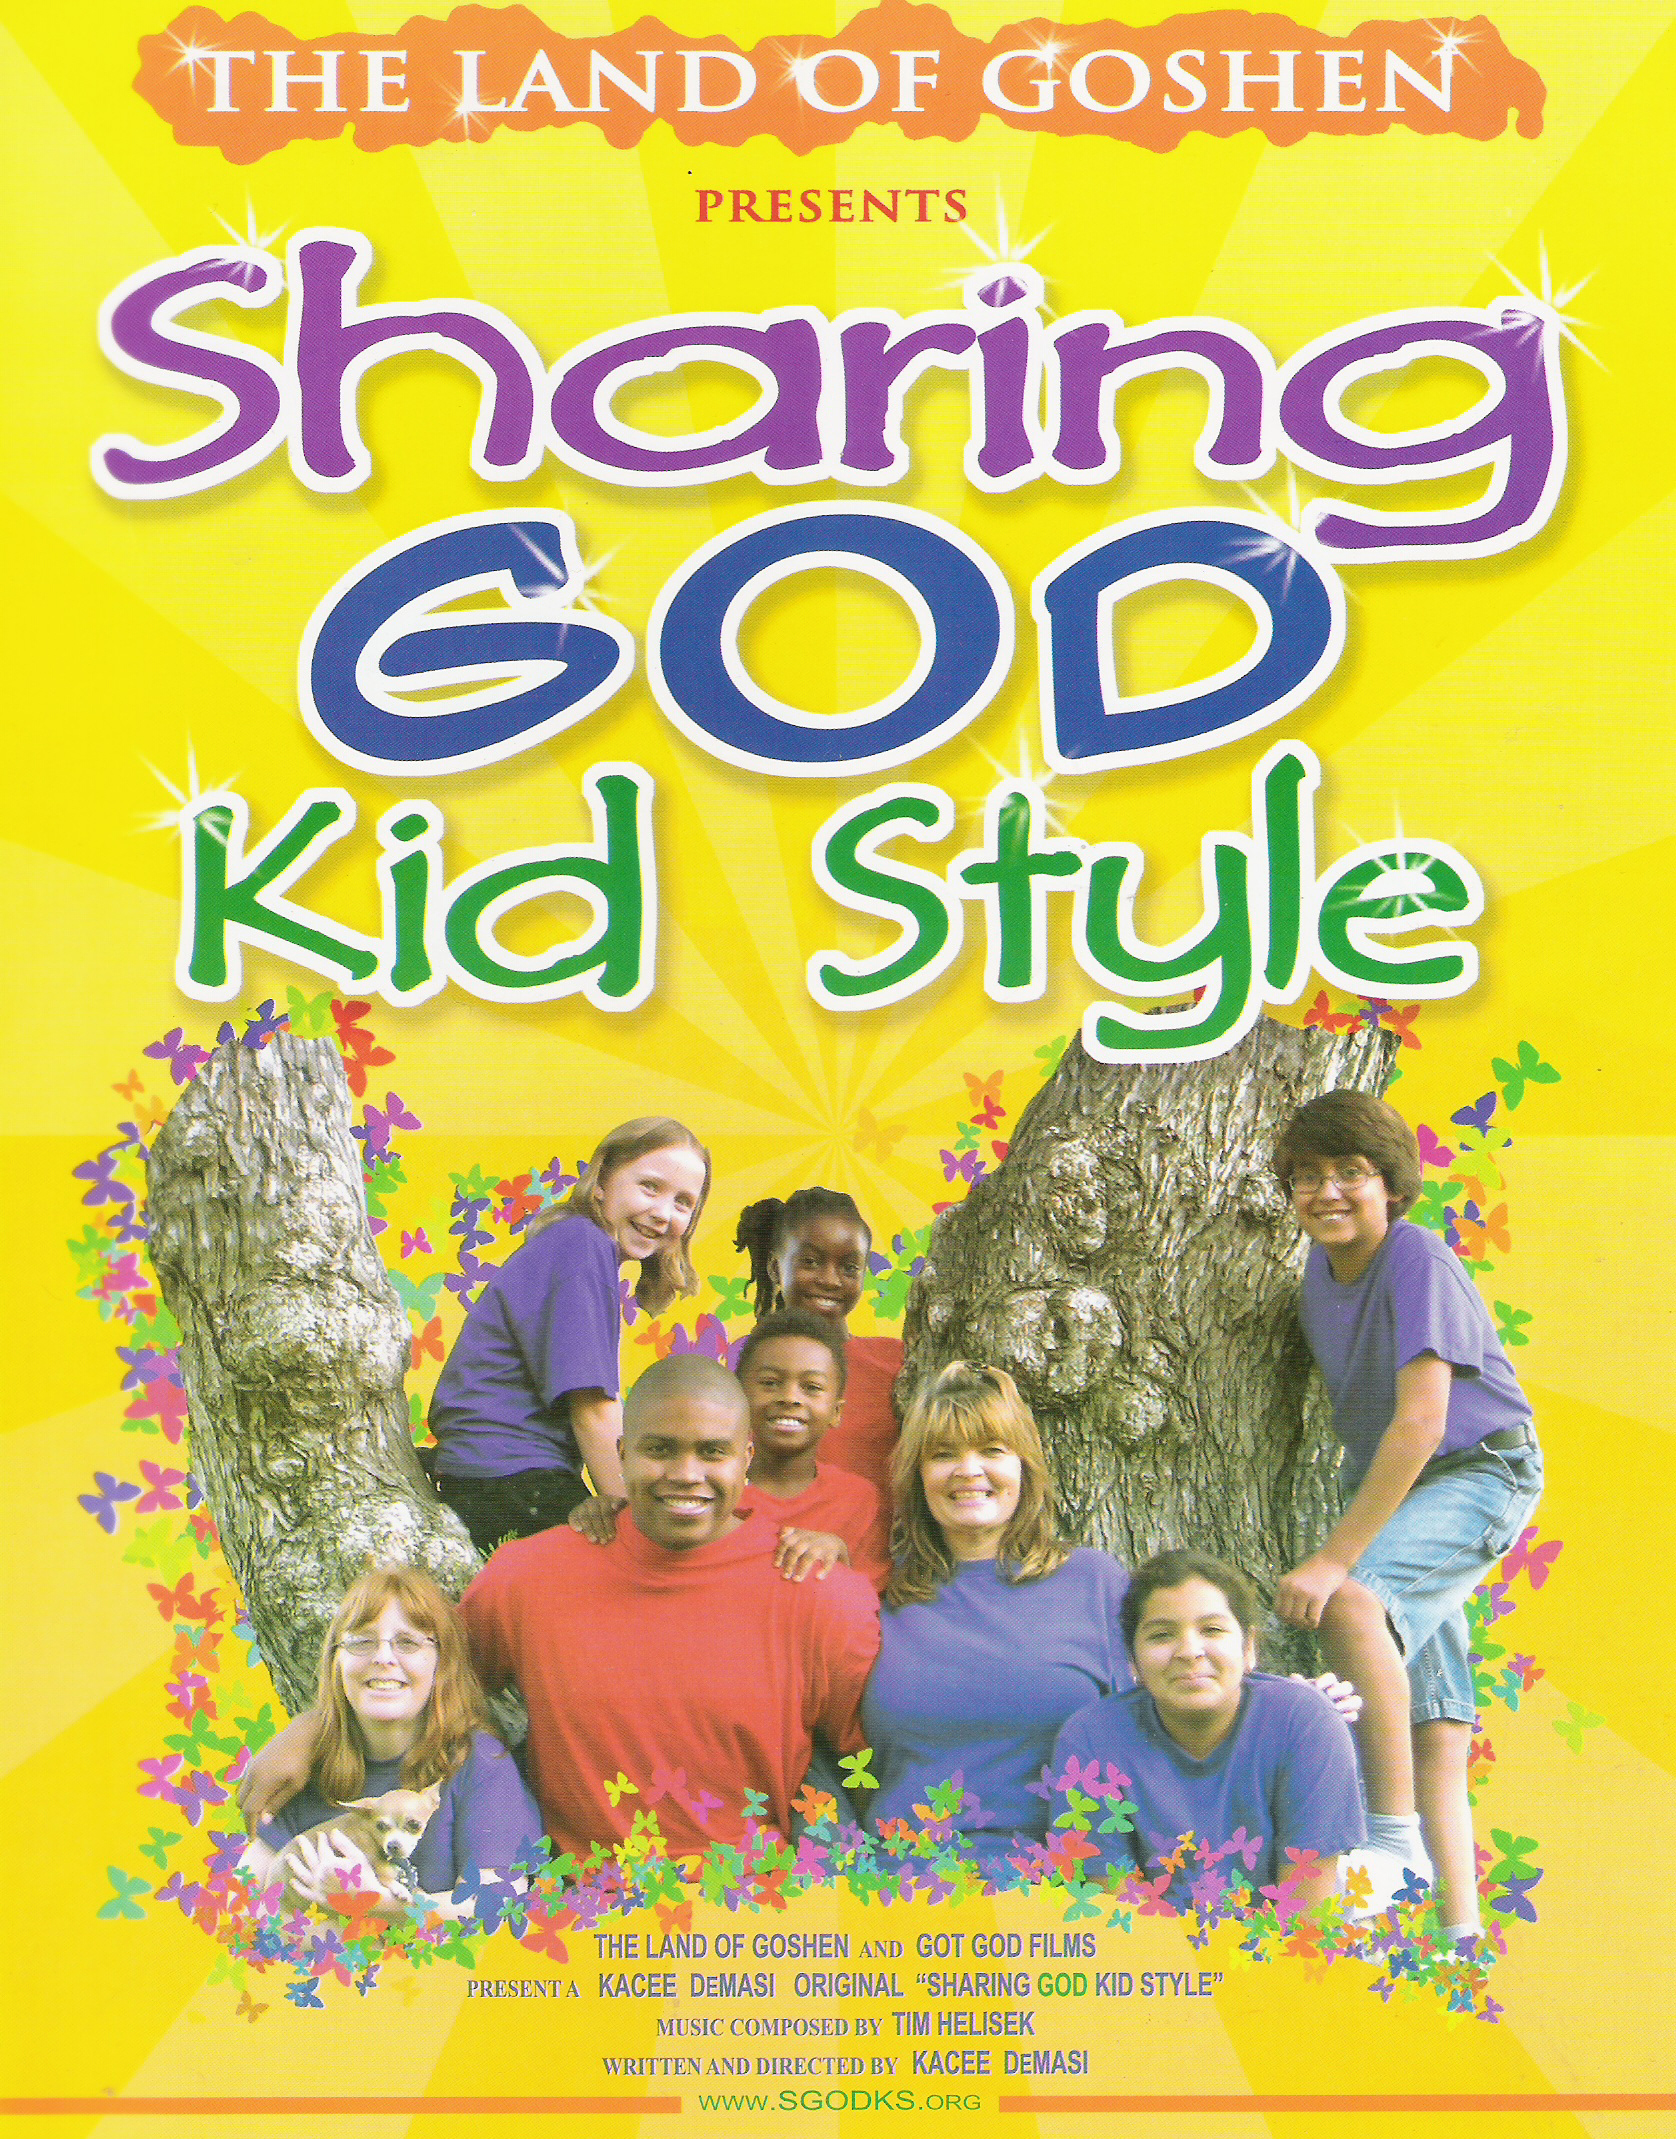 Sharing GOD Kid Style Movie Poster with Alexa Gardner, Victor Kelso, Julia Grosso, Sandi Steele, Katie Shippey, Brian Martinez, and Cey'wan and Waynesha Herah. Directed by Kacee DeMasi